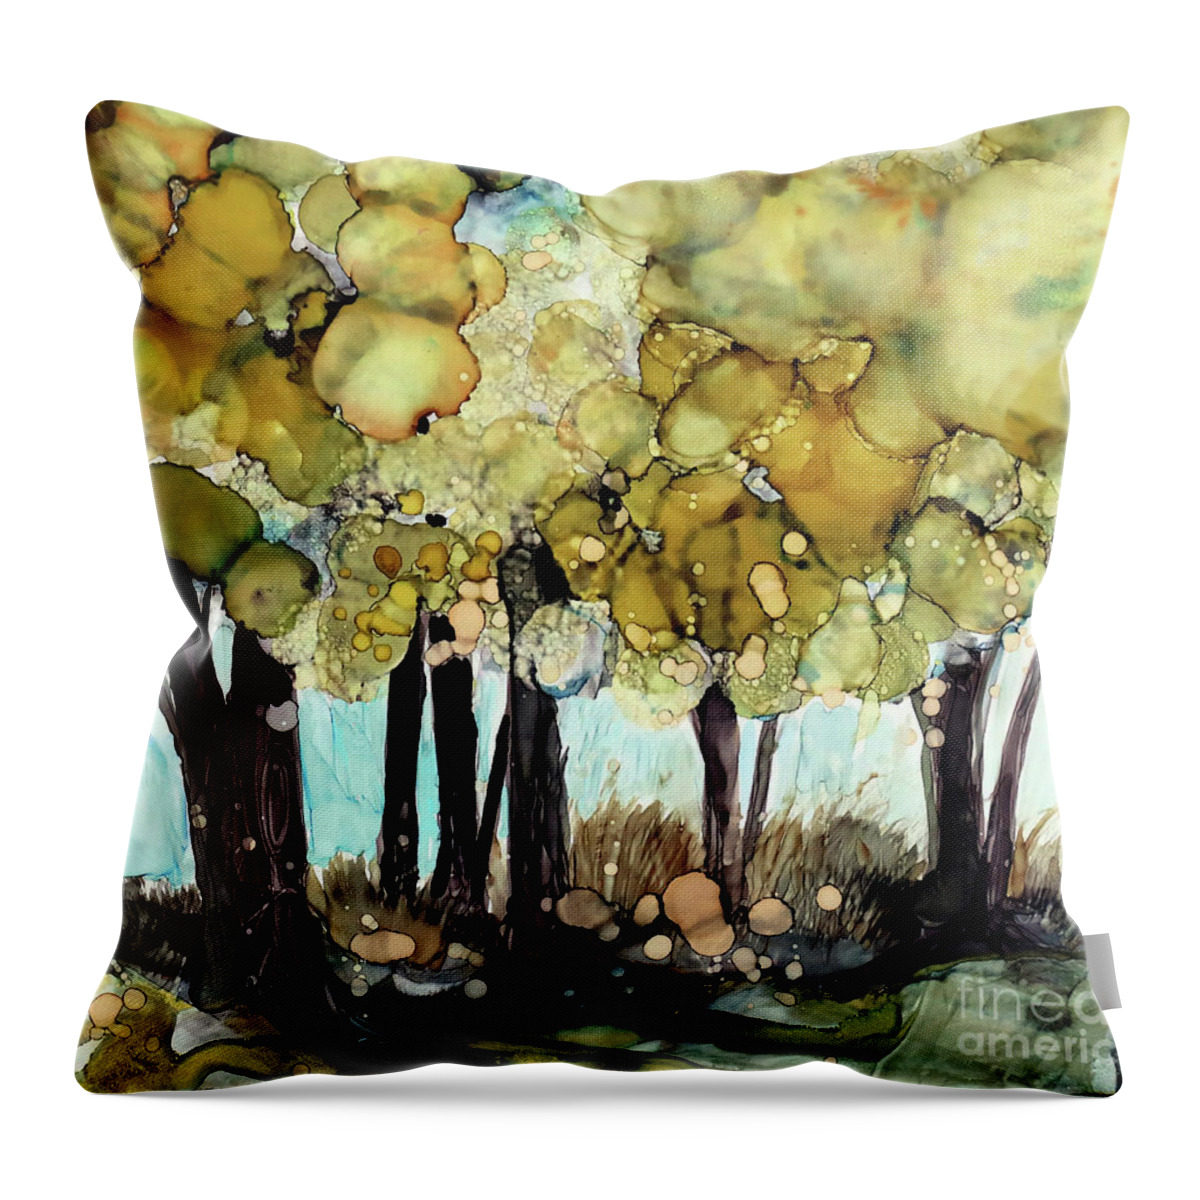  Throw Pillow featuring the painting Gold Mornings by Julie Tibus